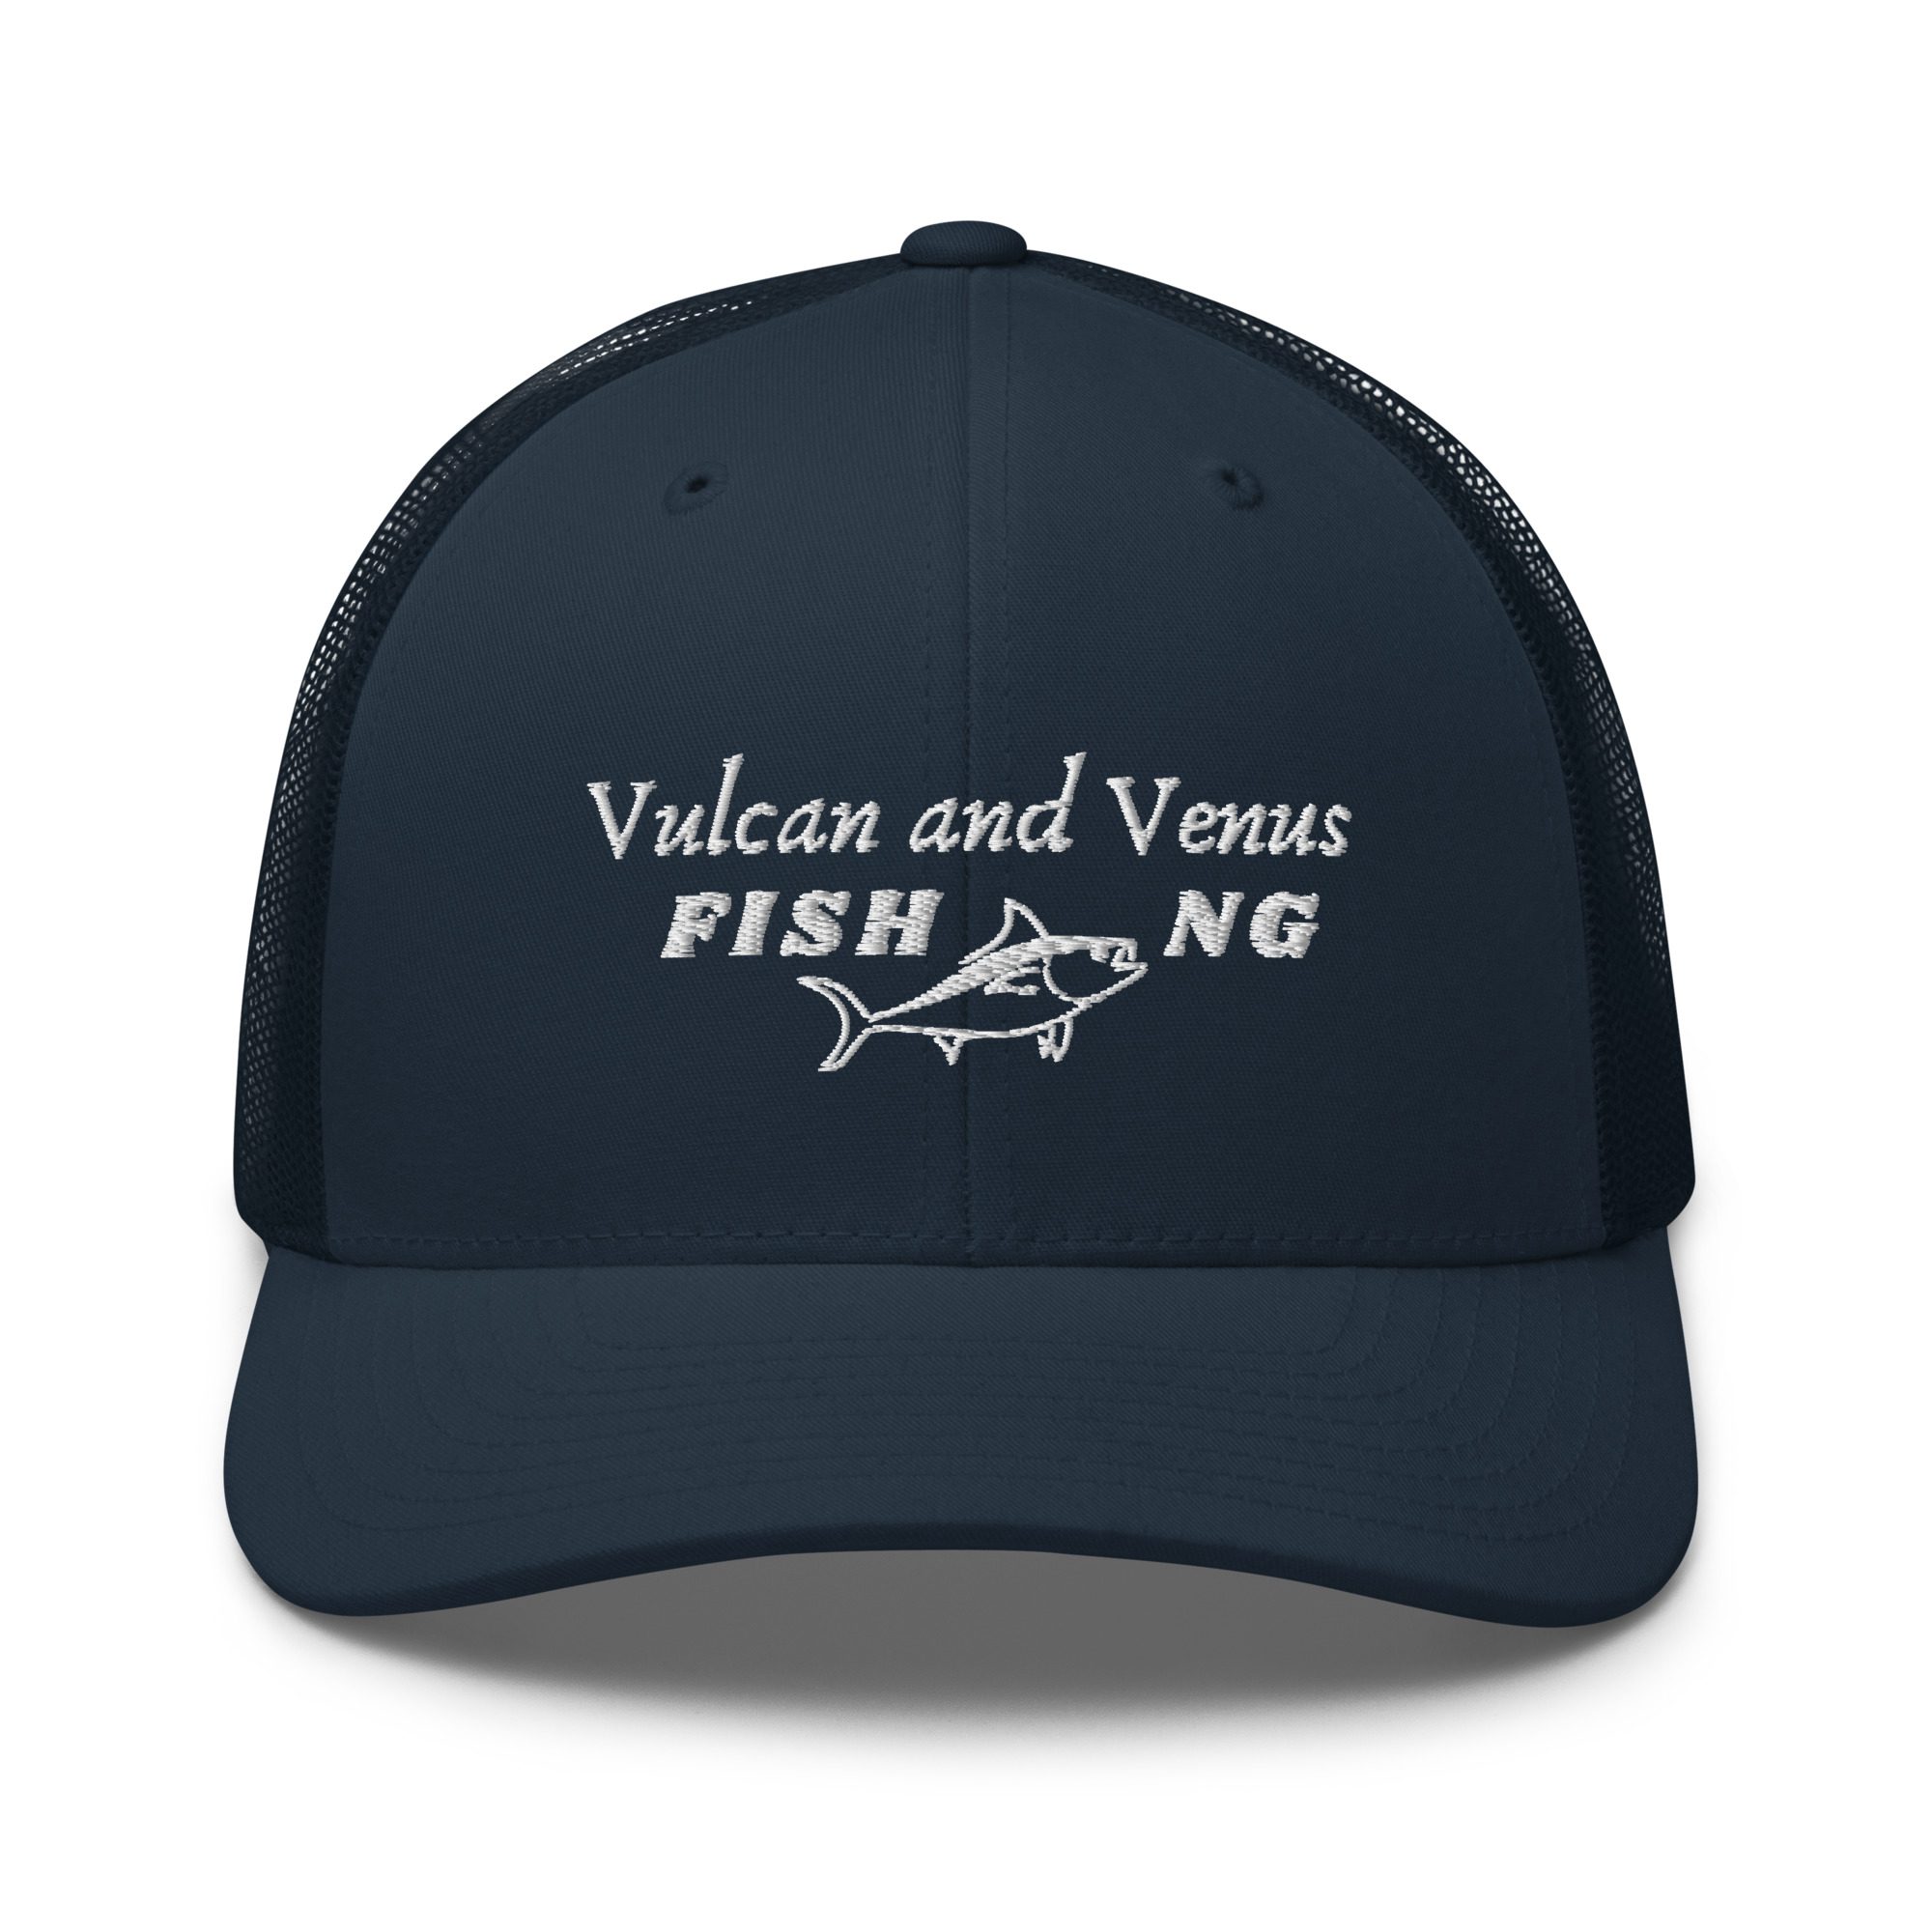 Get Out Fishing Hat - Retro Trucker Snap-Back